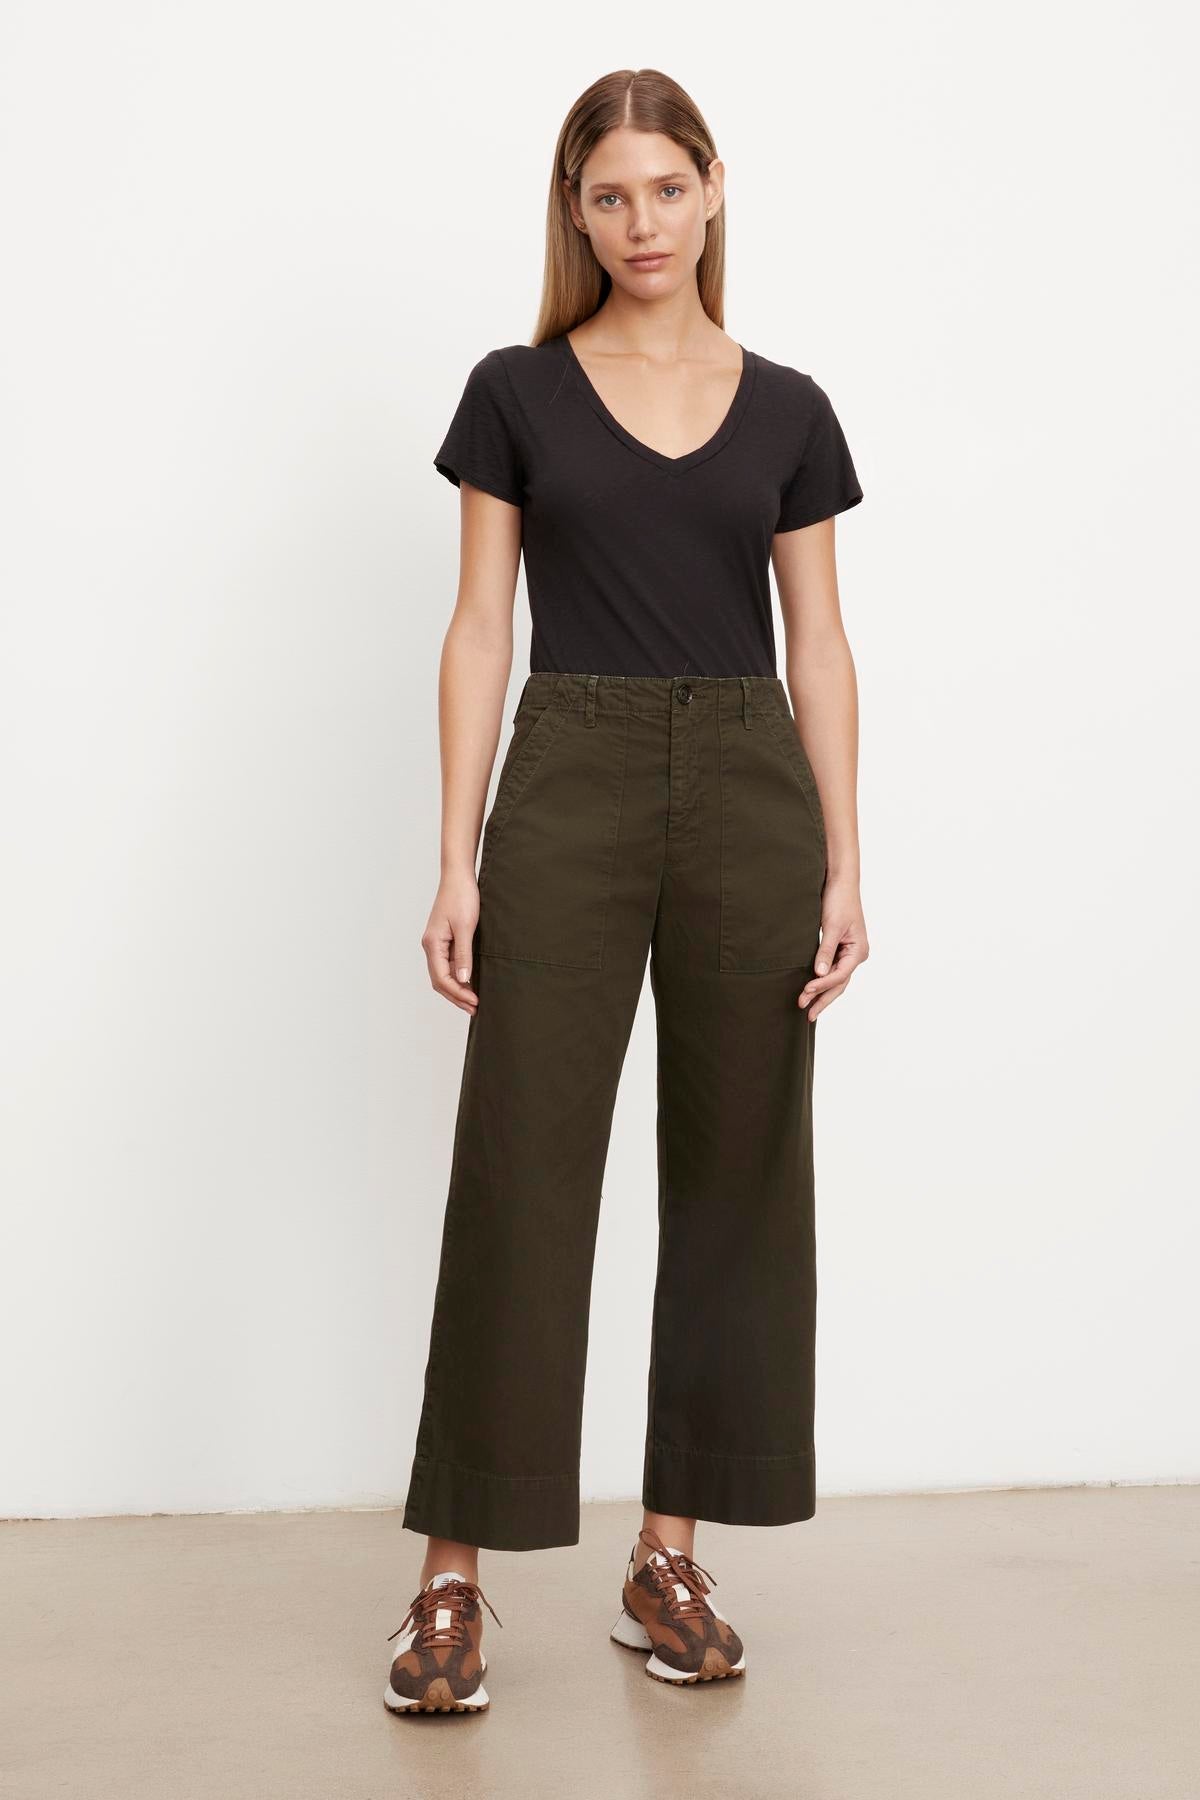 A person wearing a Velvet by Graham & Spencer slim top and Velvet by Graham & Spencer cropped trousers in olive green.-36320657080513